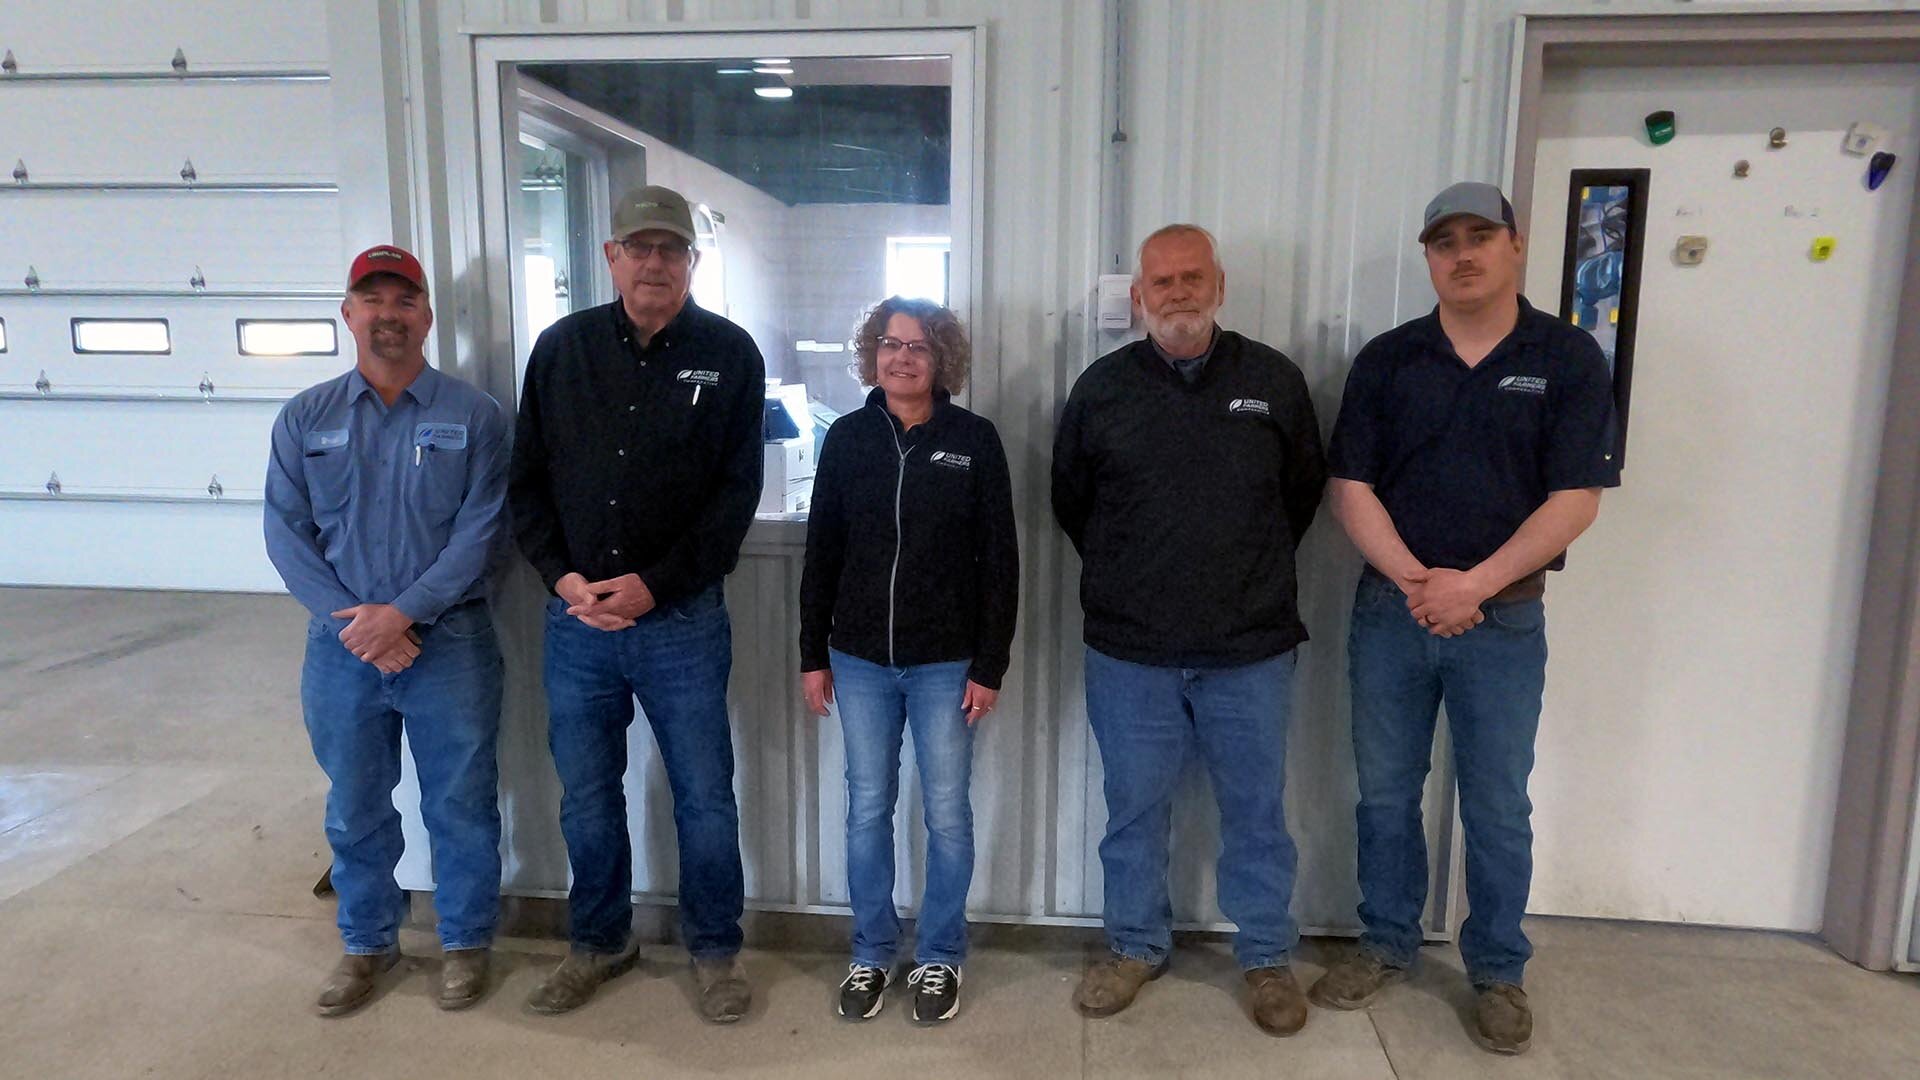  The United Farmers Cooperative — Farragut, IA, team includes (from left): Brad Maher (Agronomy Operations Manager), Larry Schniepp (Location Manager/Agronomy Sales), Kris Spears (Customer Service/Agronomy Accounting), Ron Tvinnereim (Asset Manager),